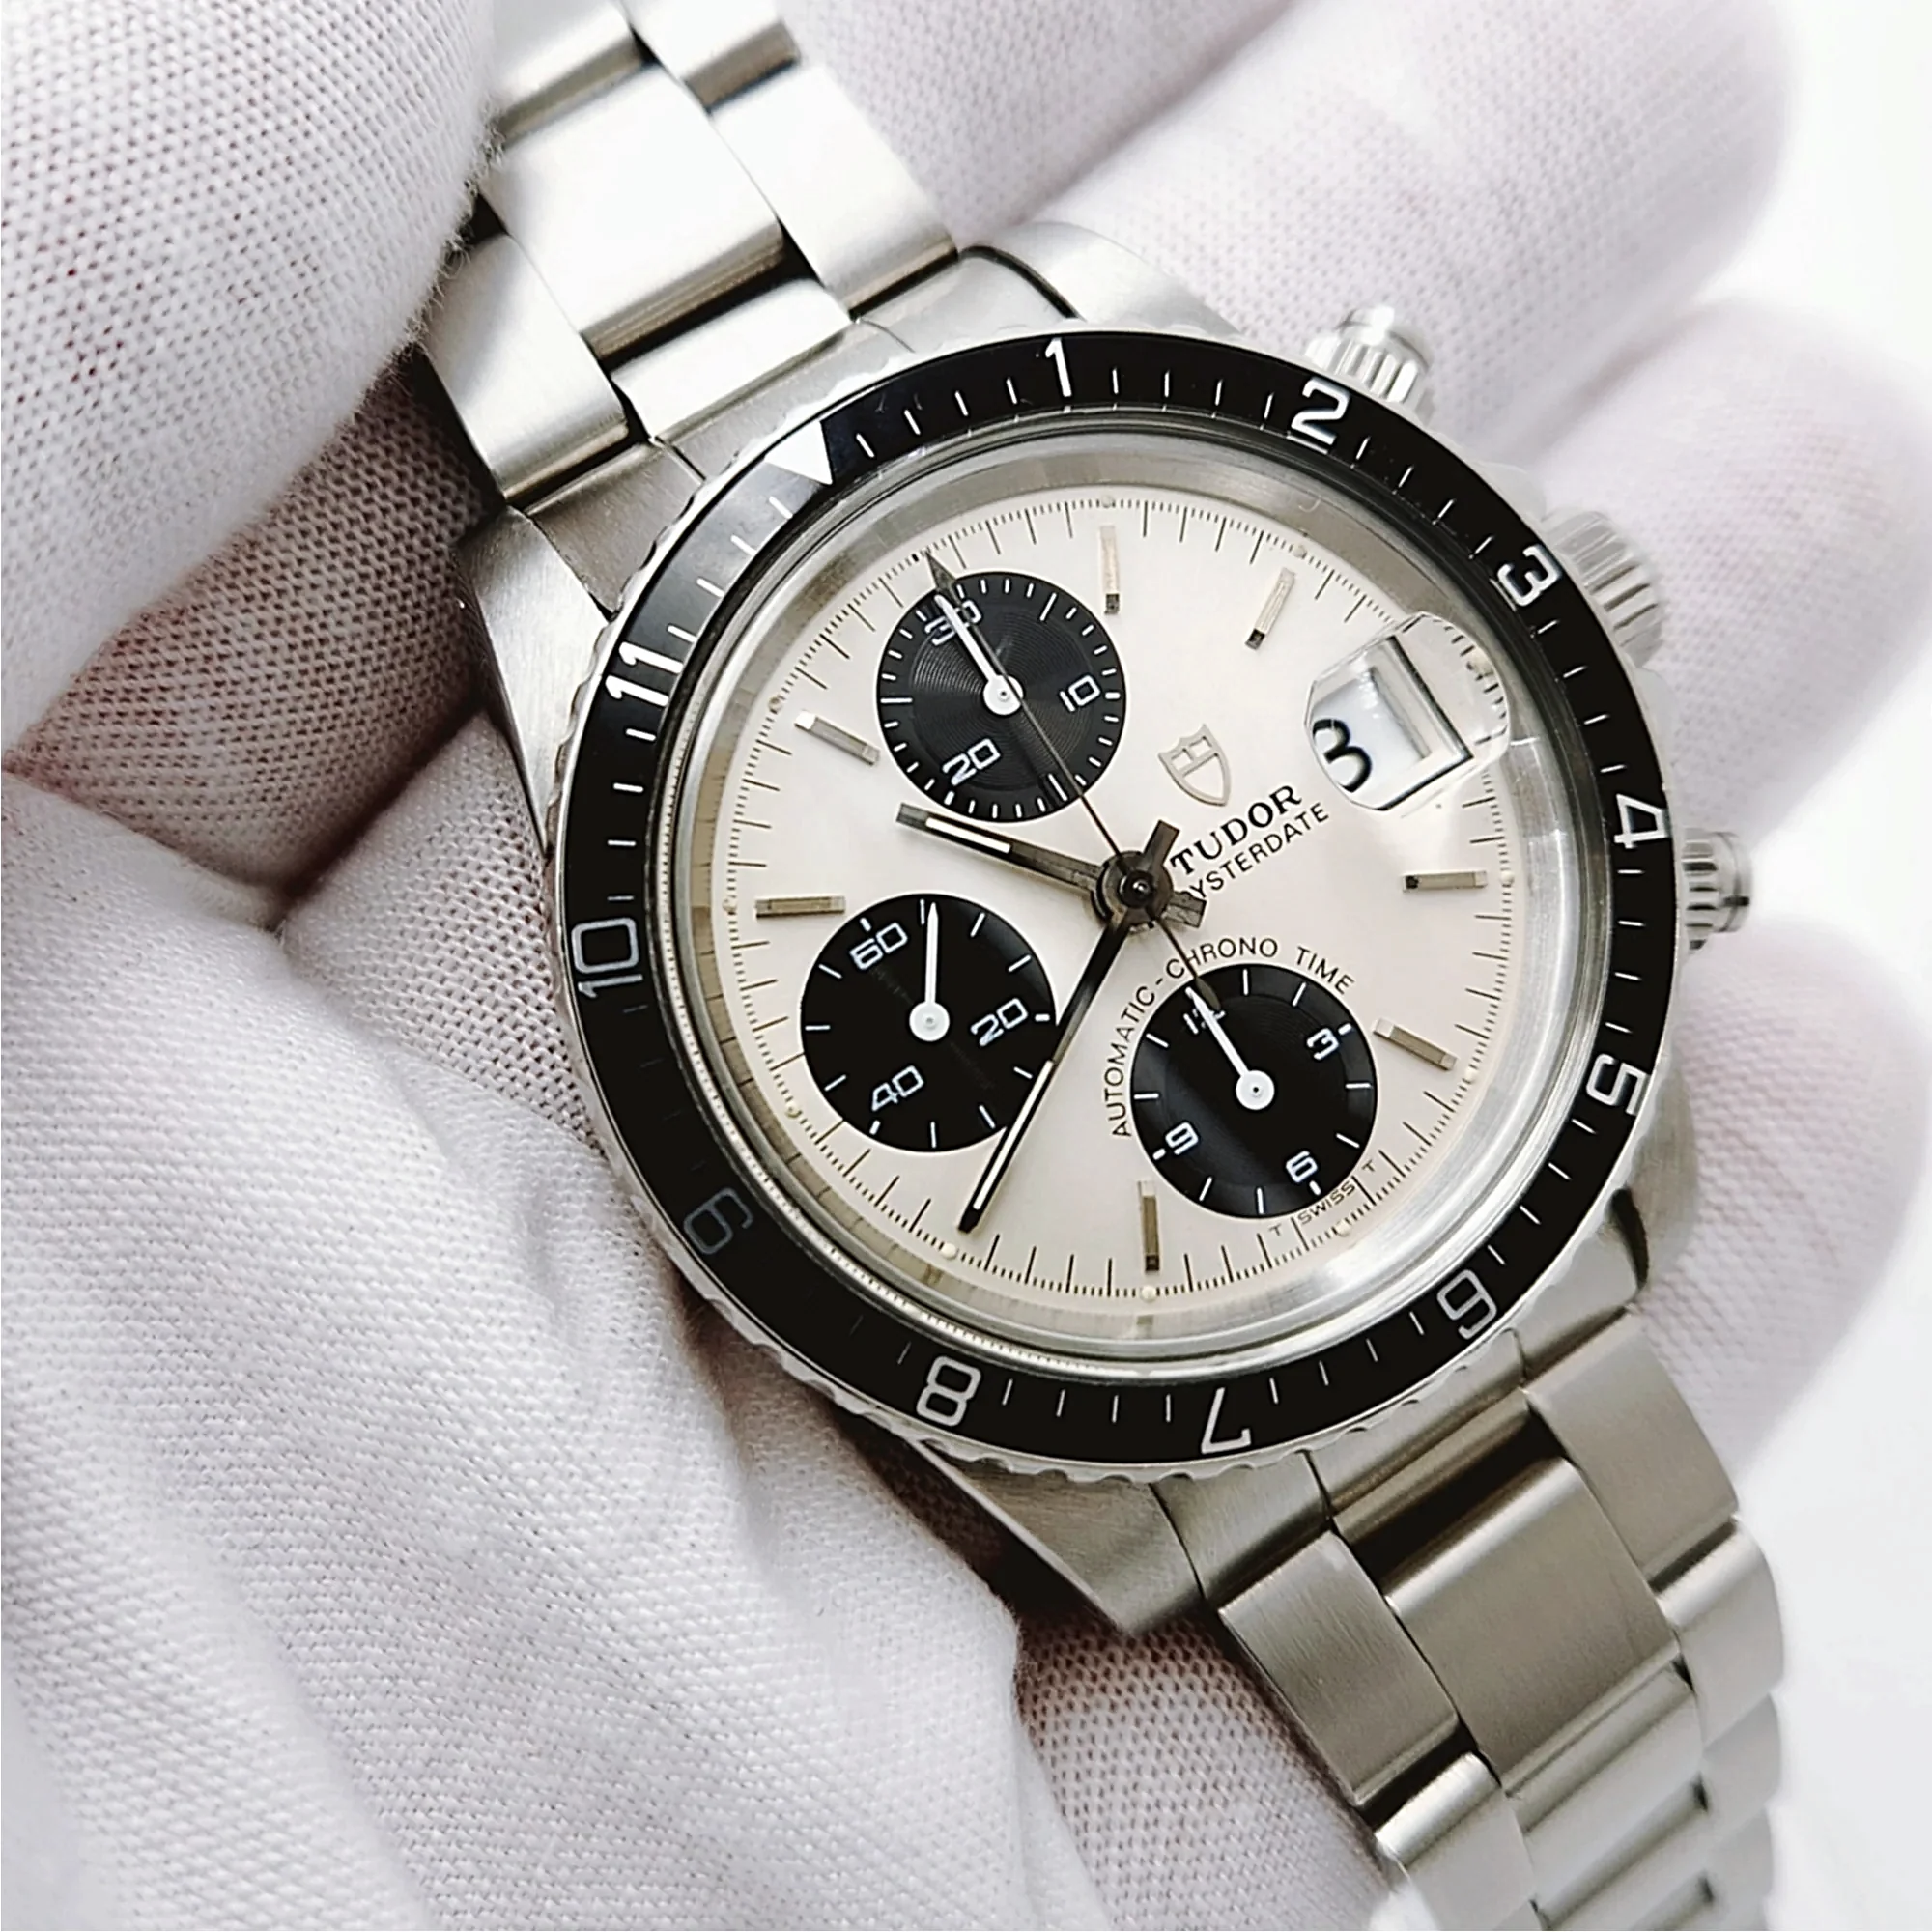 Men's Tudor 40mm Big Block Automatic Oyster Stainless Steel Watch with Panda Chronograph Dial. (Pre-Owned 79170)